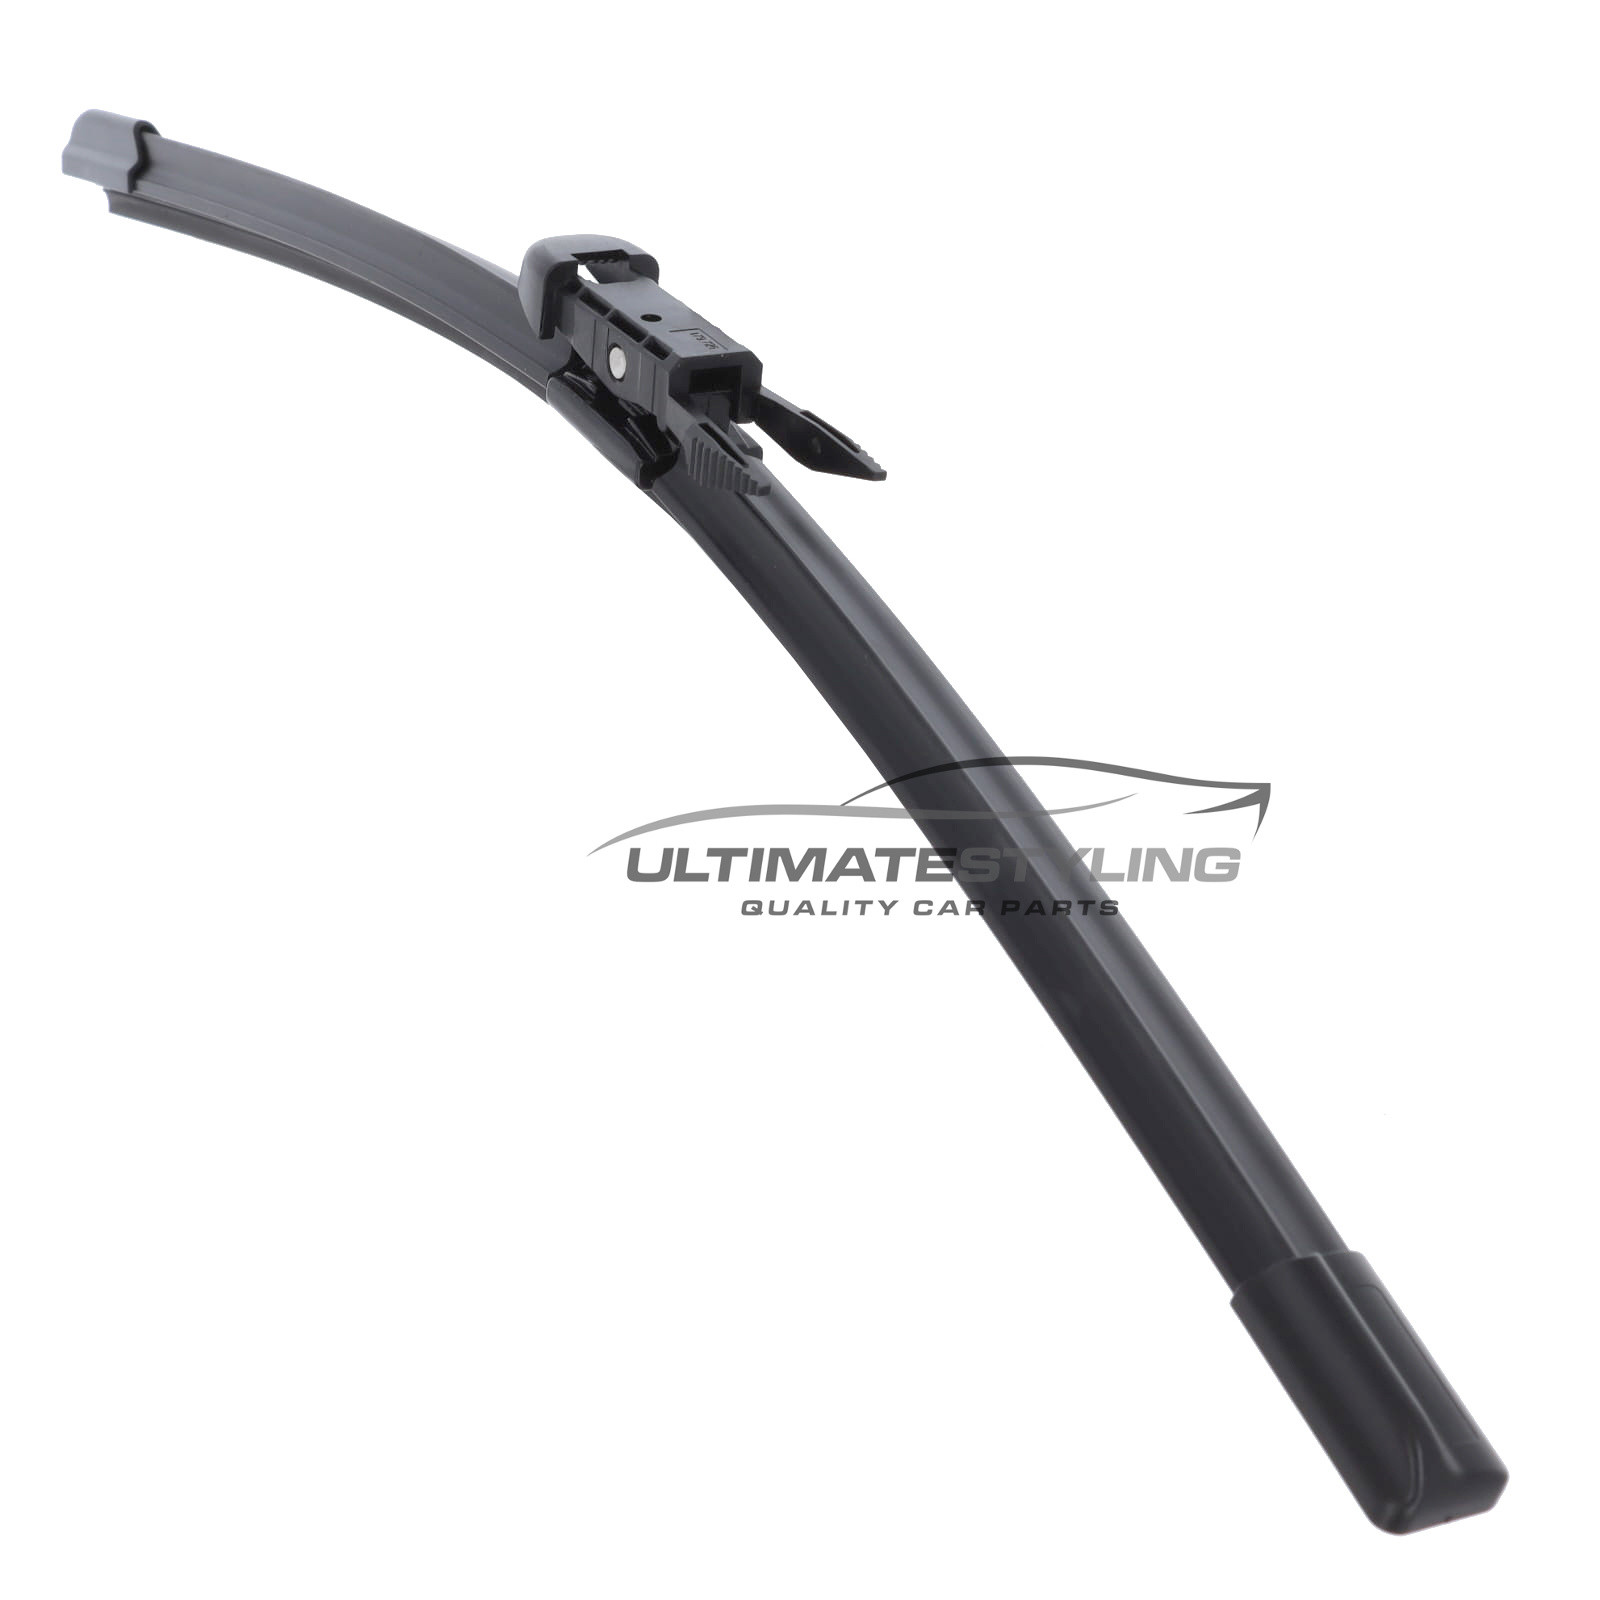 Wiper Blade Exact Fit Aero Blade 40 cm 16 inch for